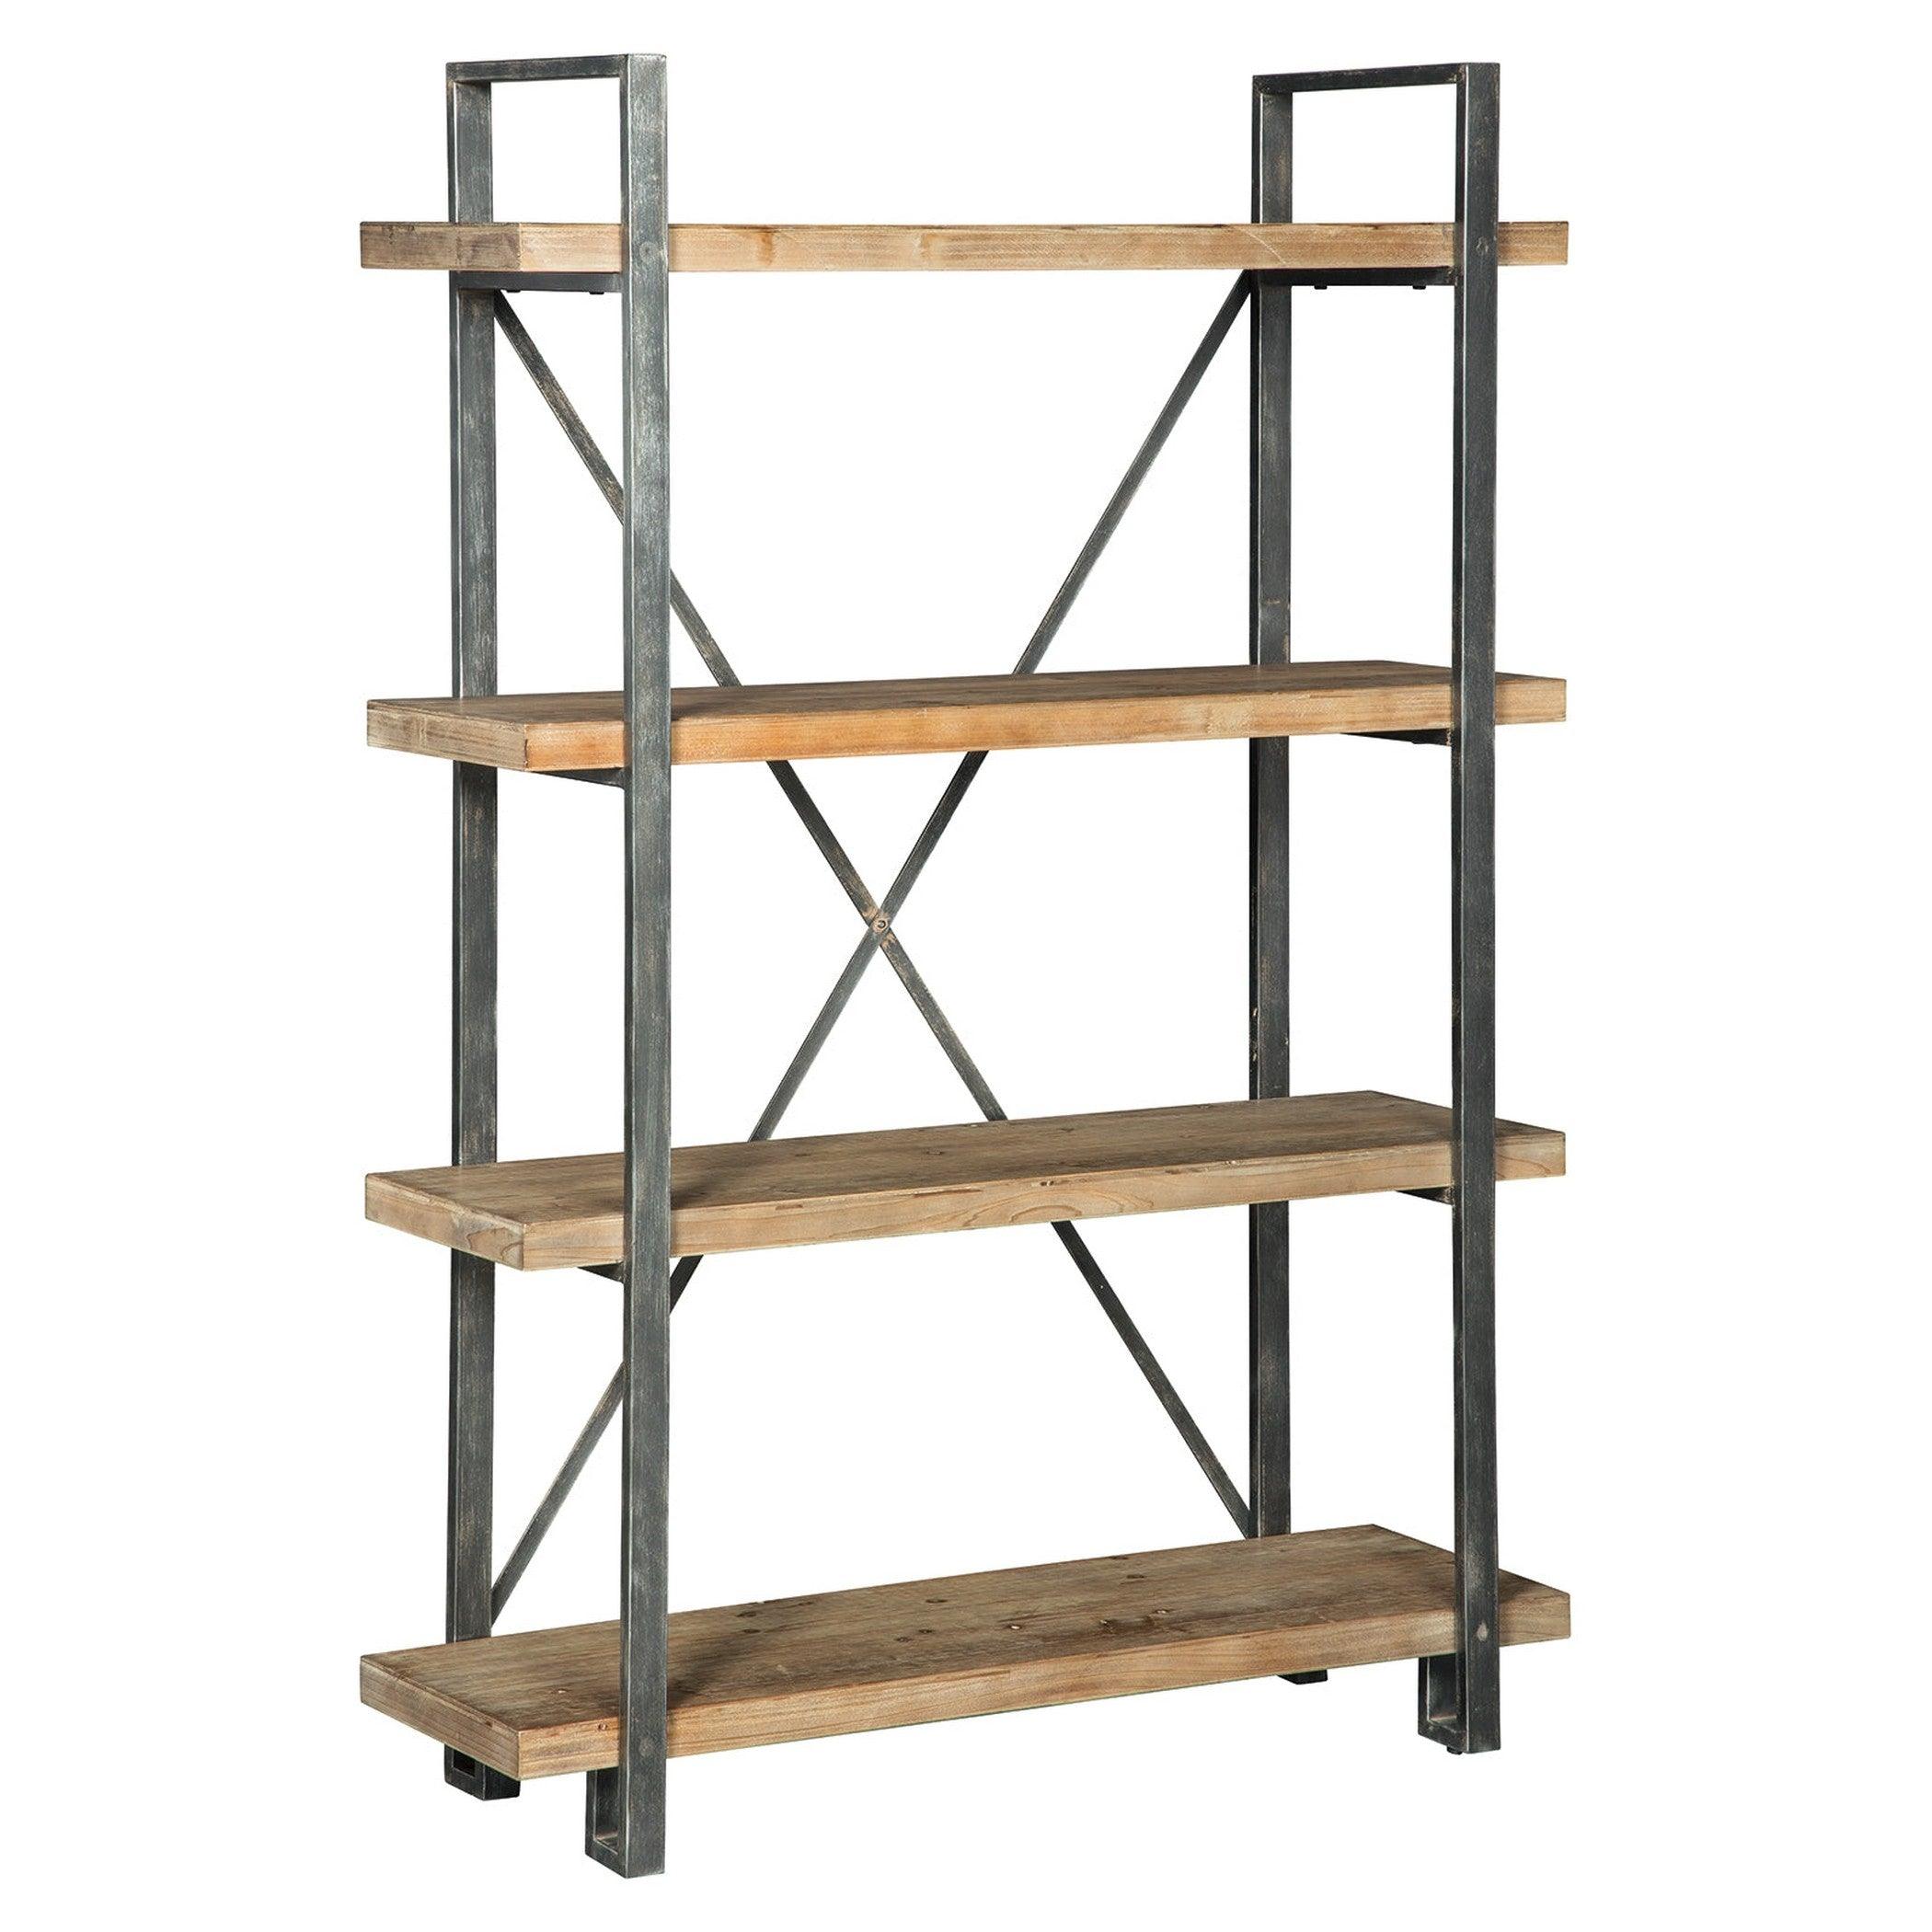 Forestmin Bookcase Ash-A4000045